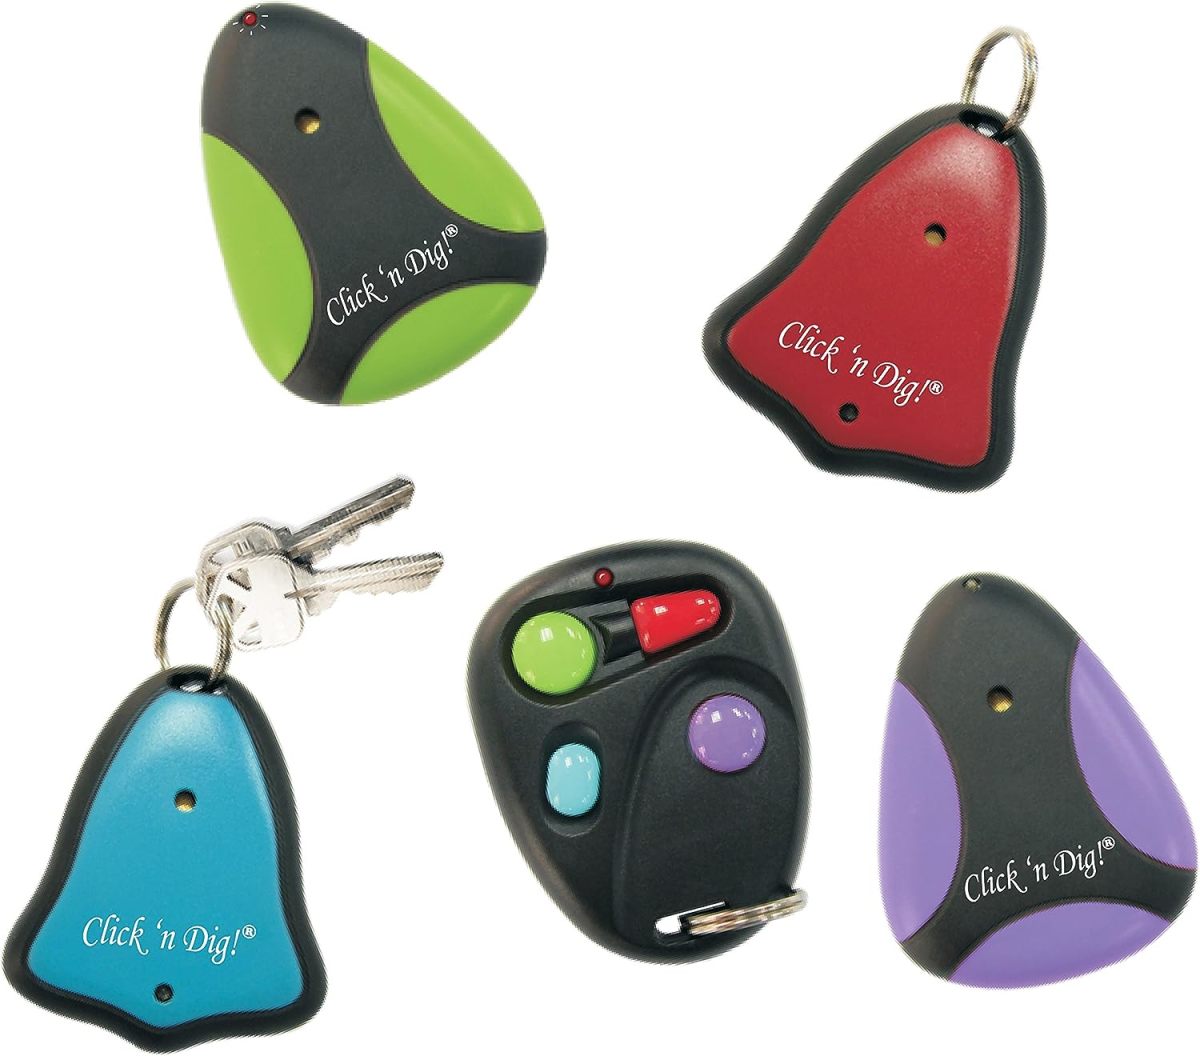 Lost Keys? Find Your Keys With An Electronic Key Finder Gadget